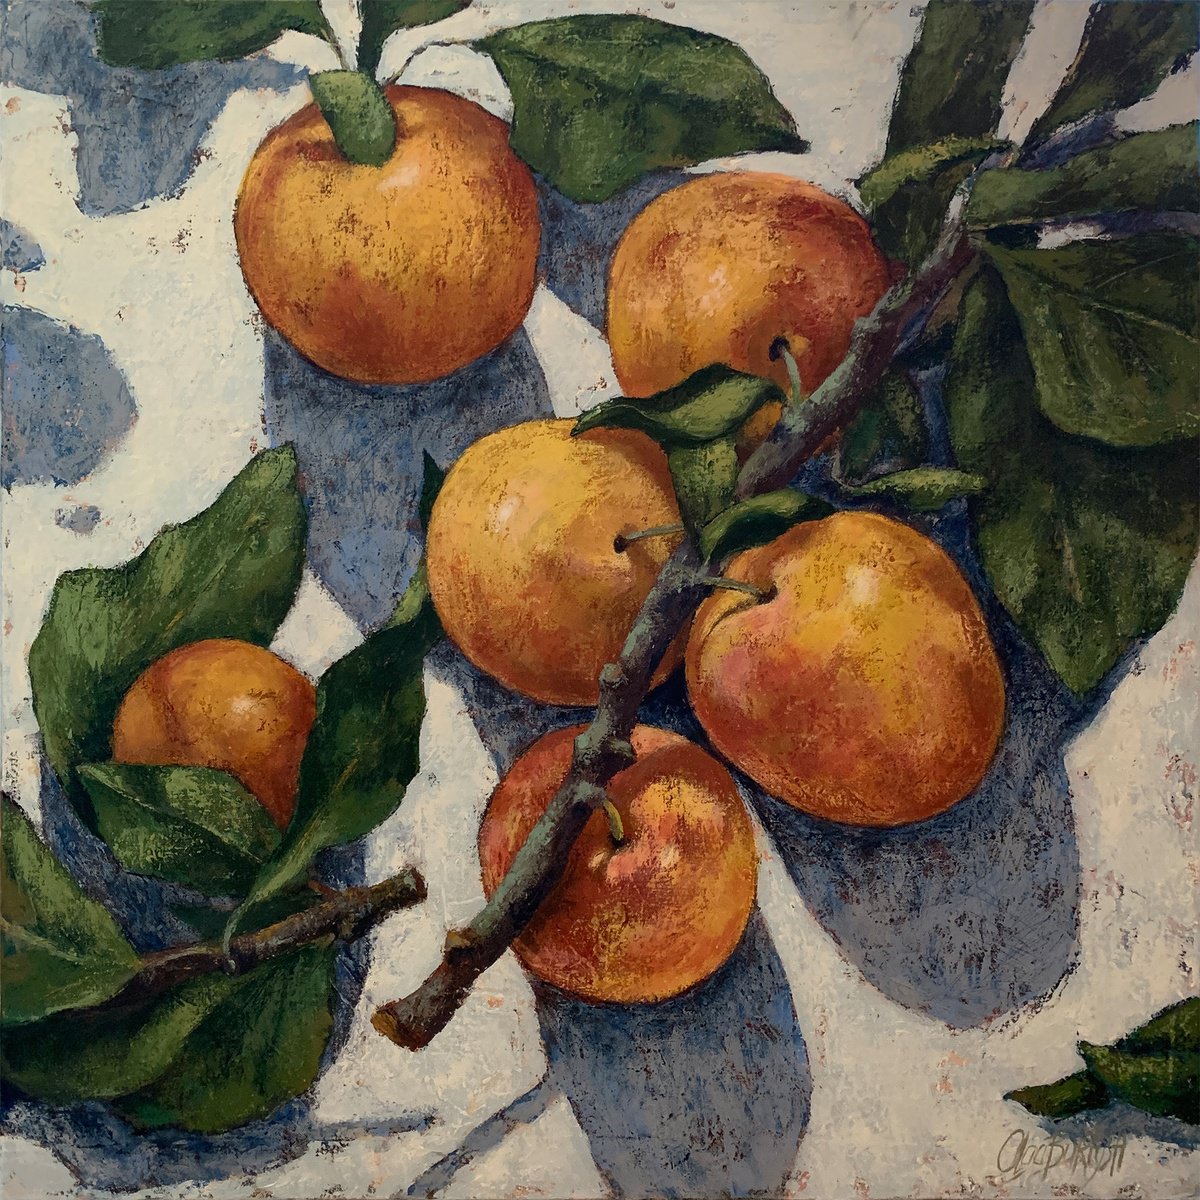 Yellow plums have blue shadows by Olga Bartysh